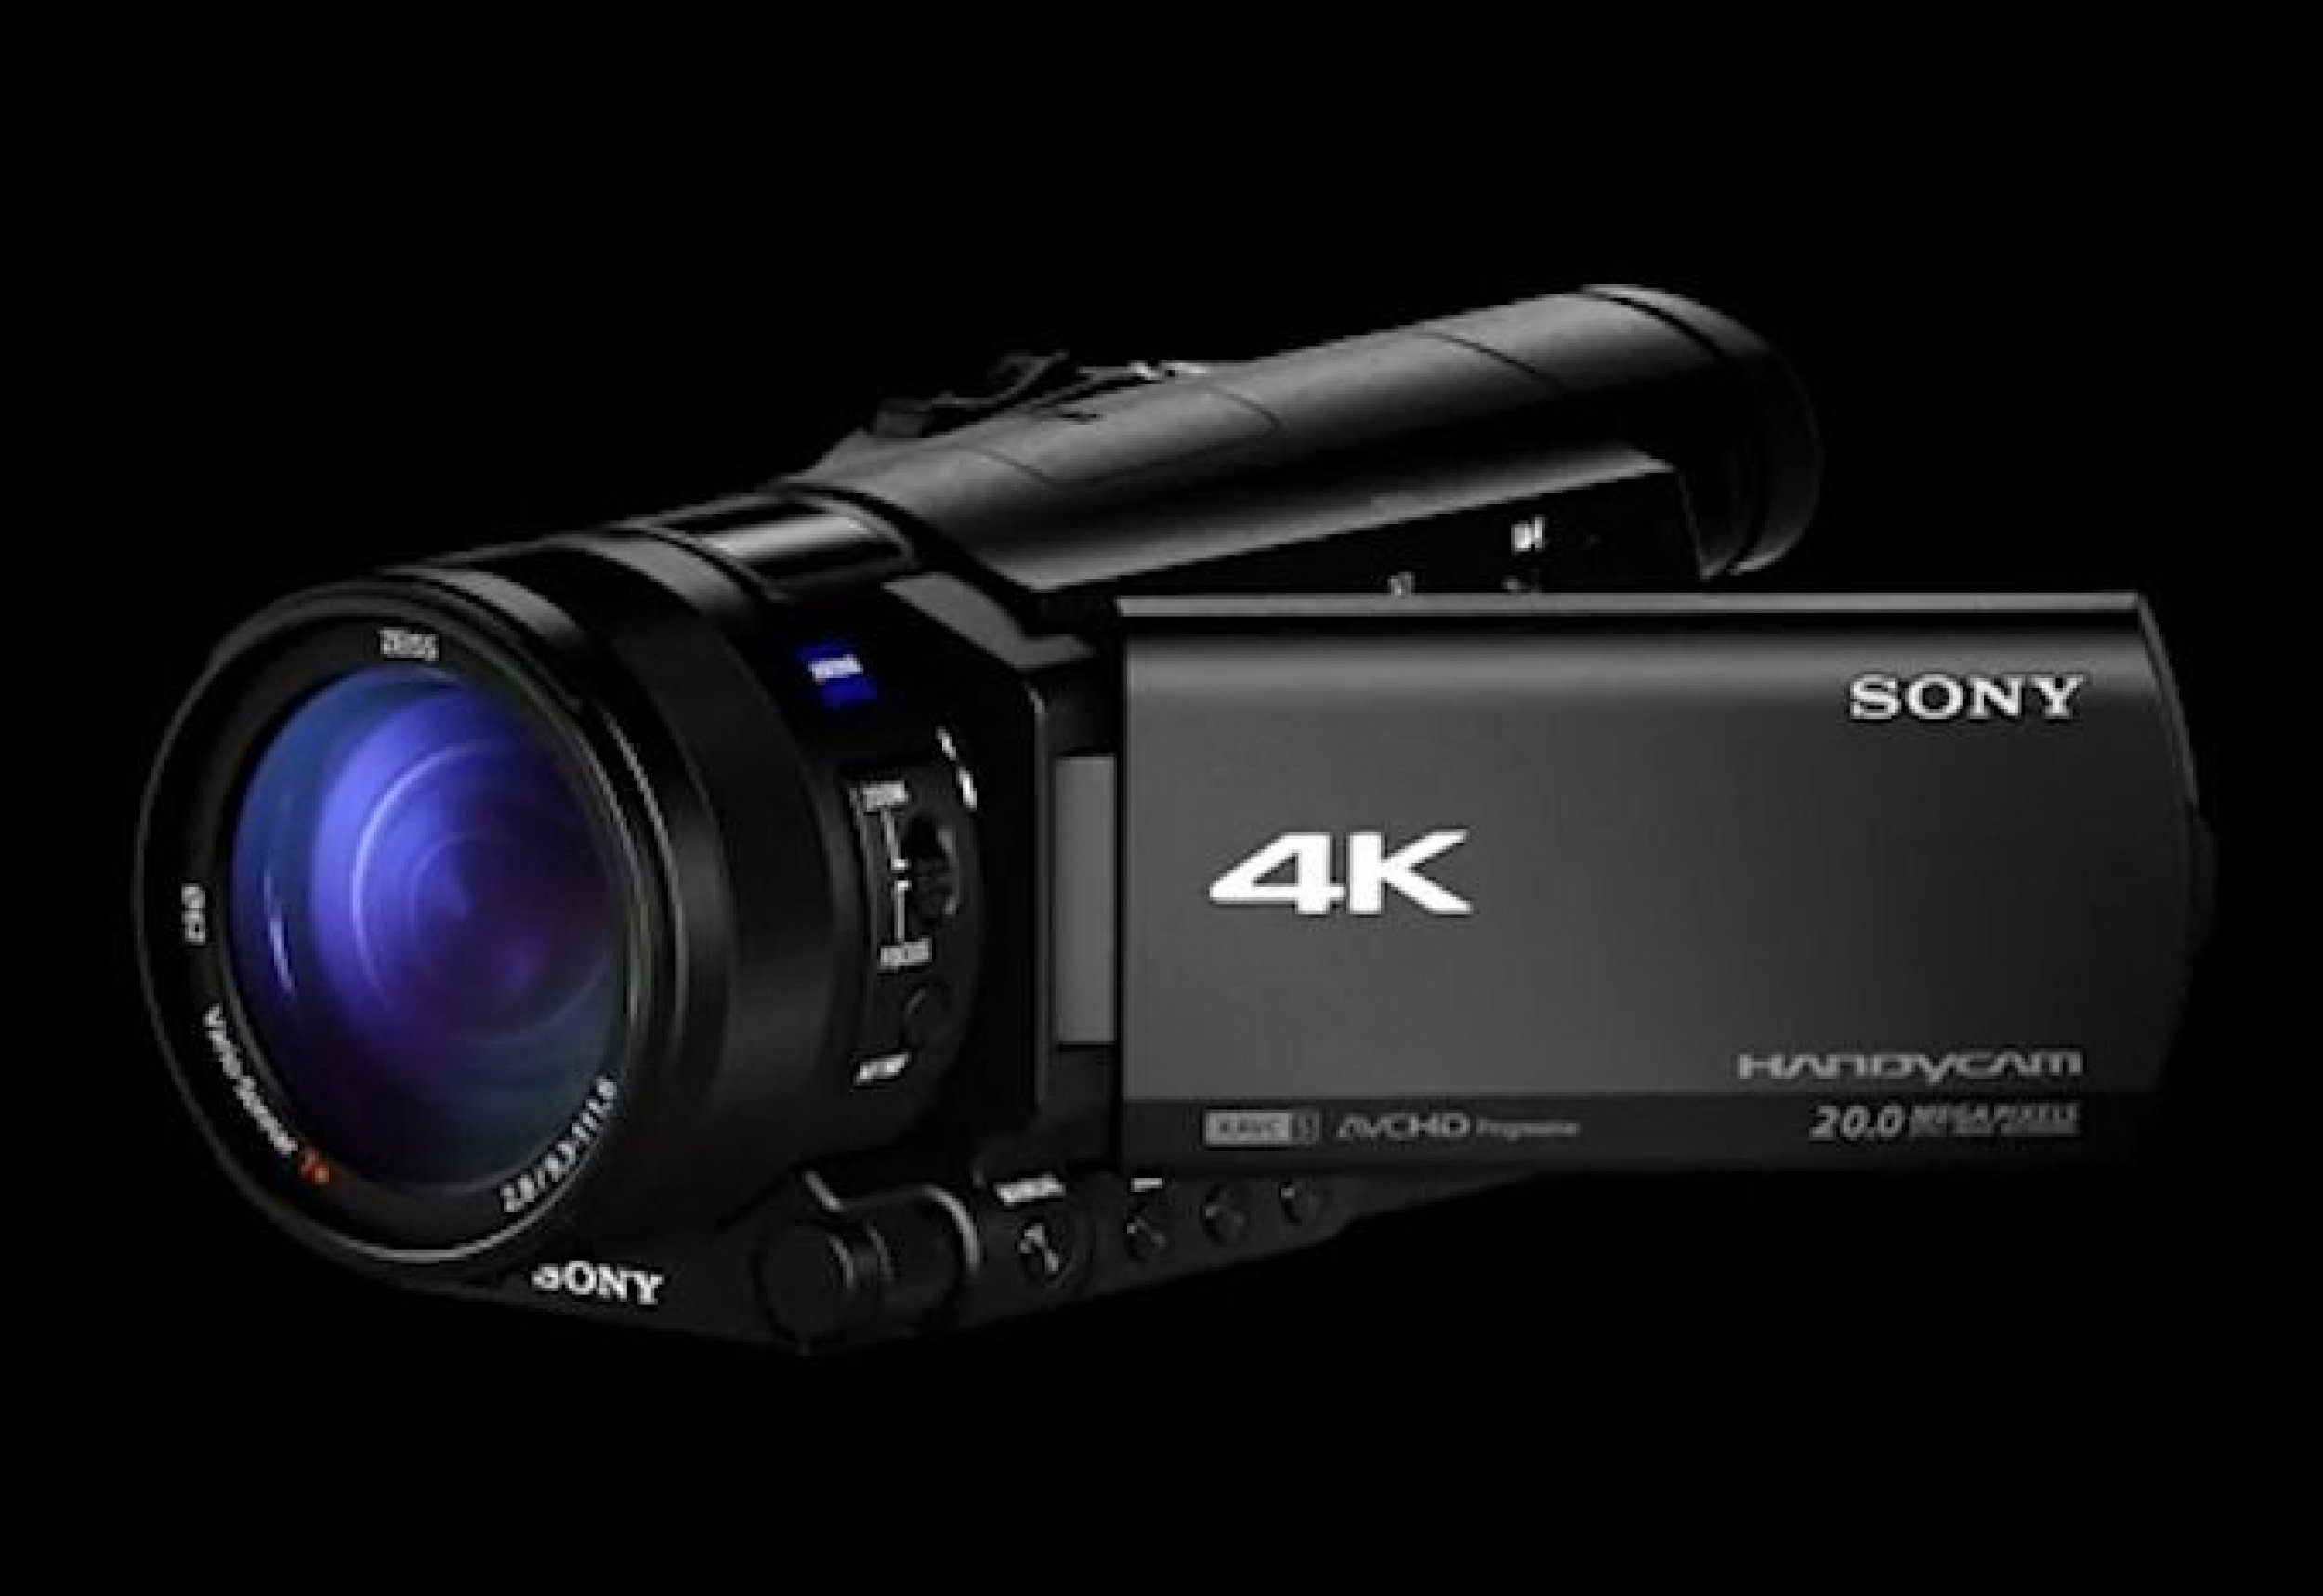 Sonys New Camcorder Shoots 4K For Under 2K